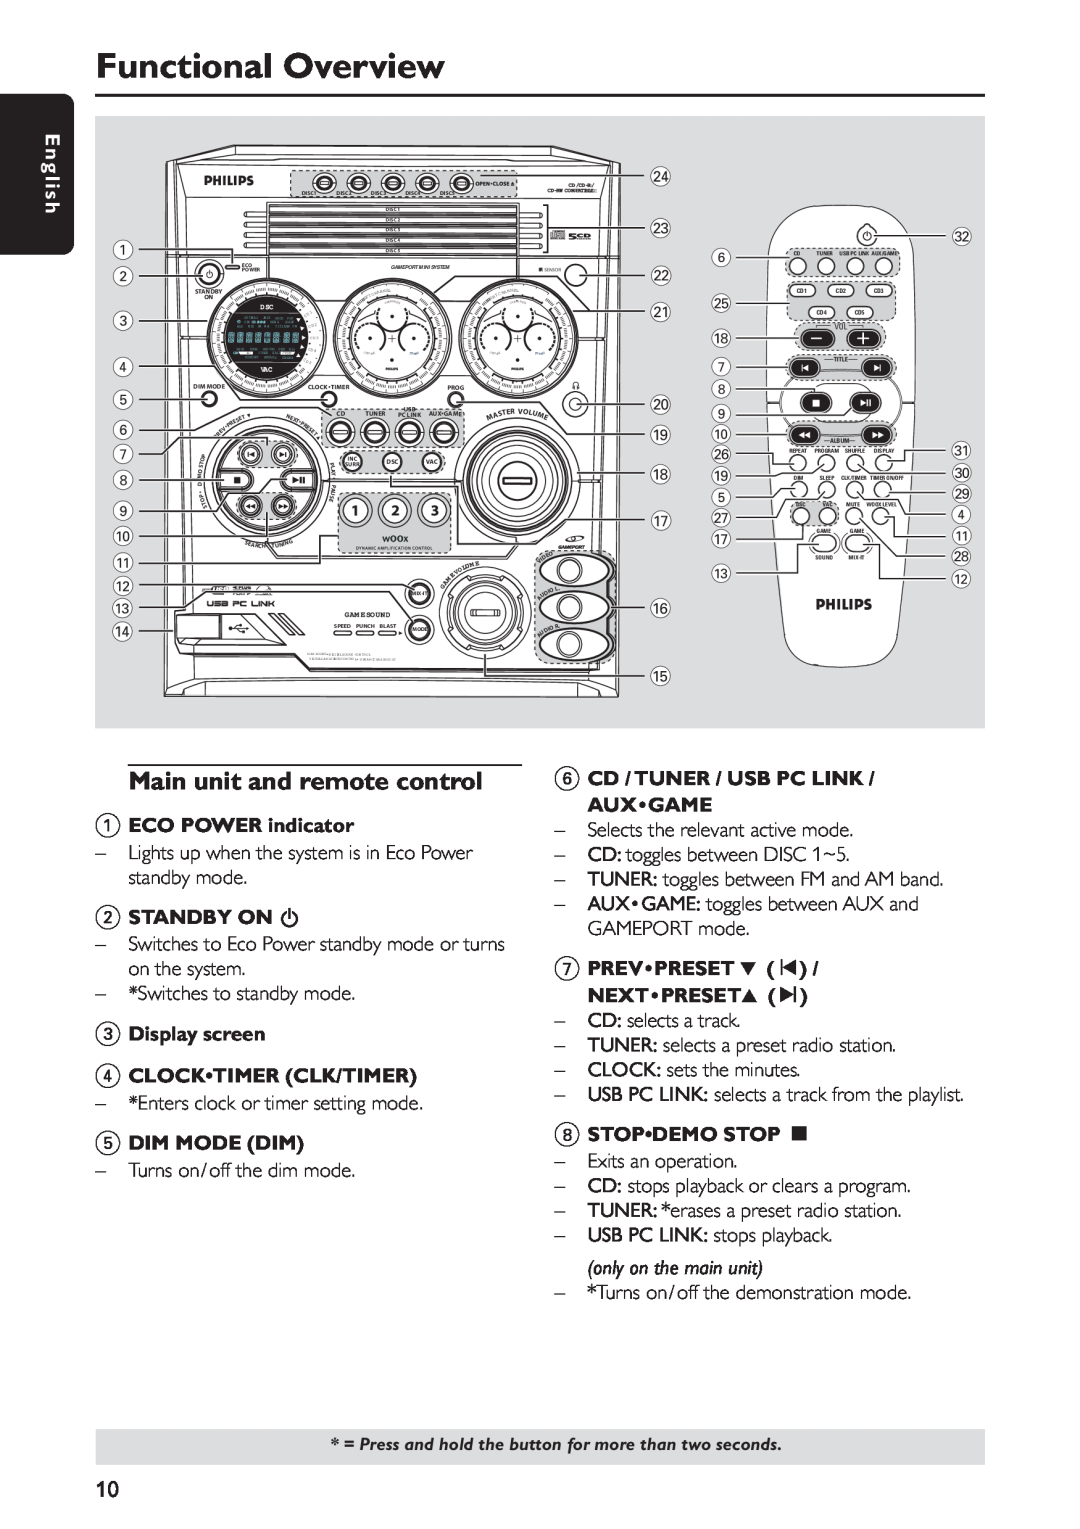 Sony FW-C777 warranty Functional Overview, Main unit and remote control, 1ECO POWER indicator, 2STANDBY ON B, 5DIM MODE DIM 